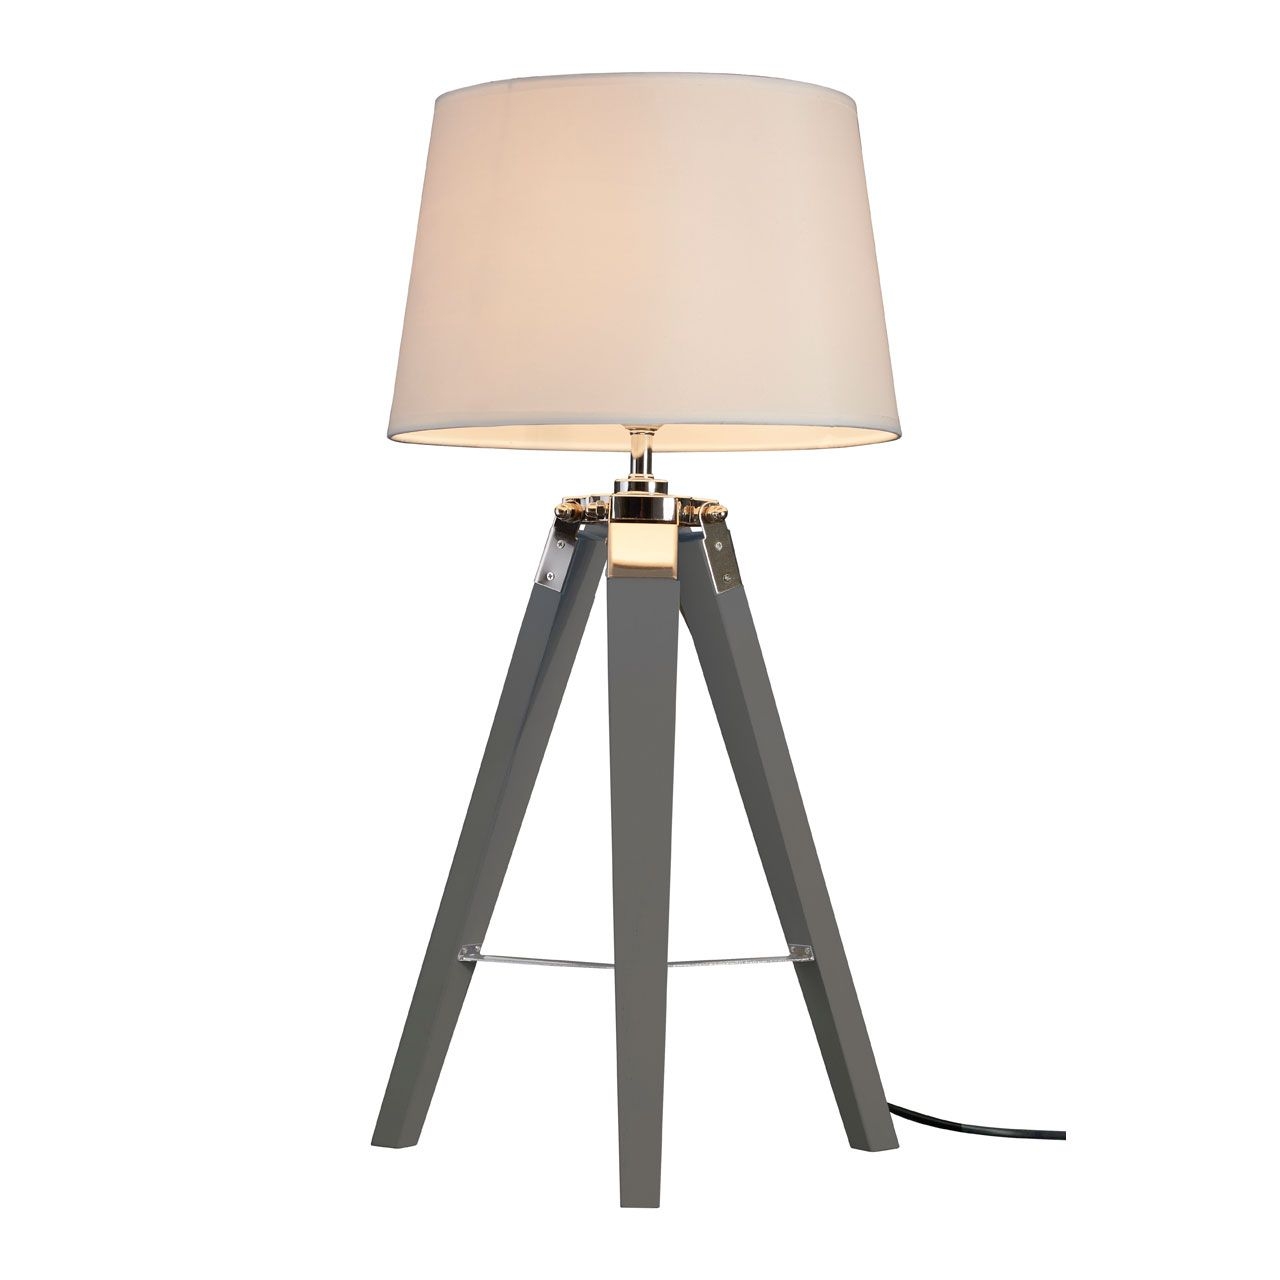 Bailey Cream Fabric Shade Table Lamp With Grey Wooden Tripod Base